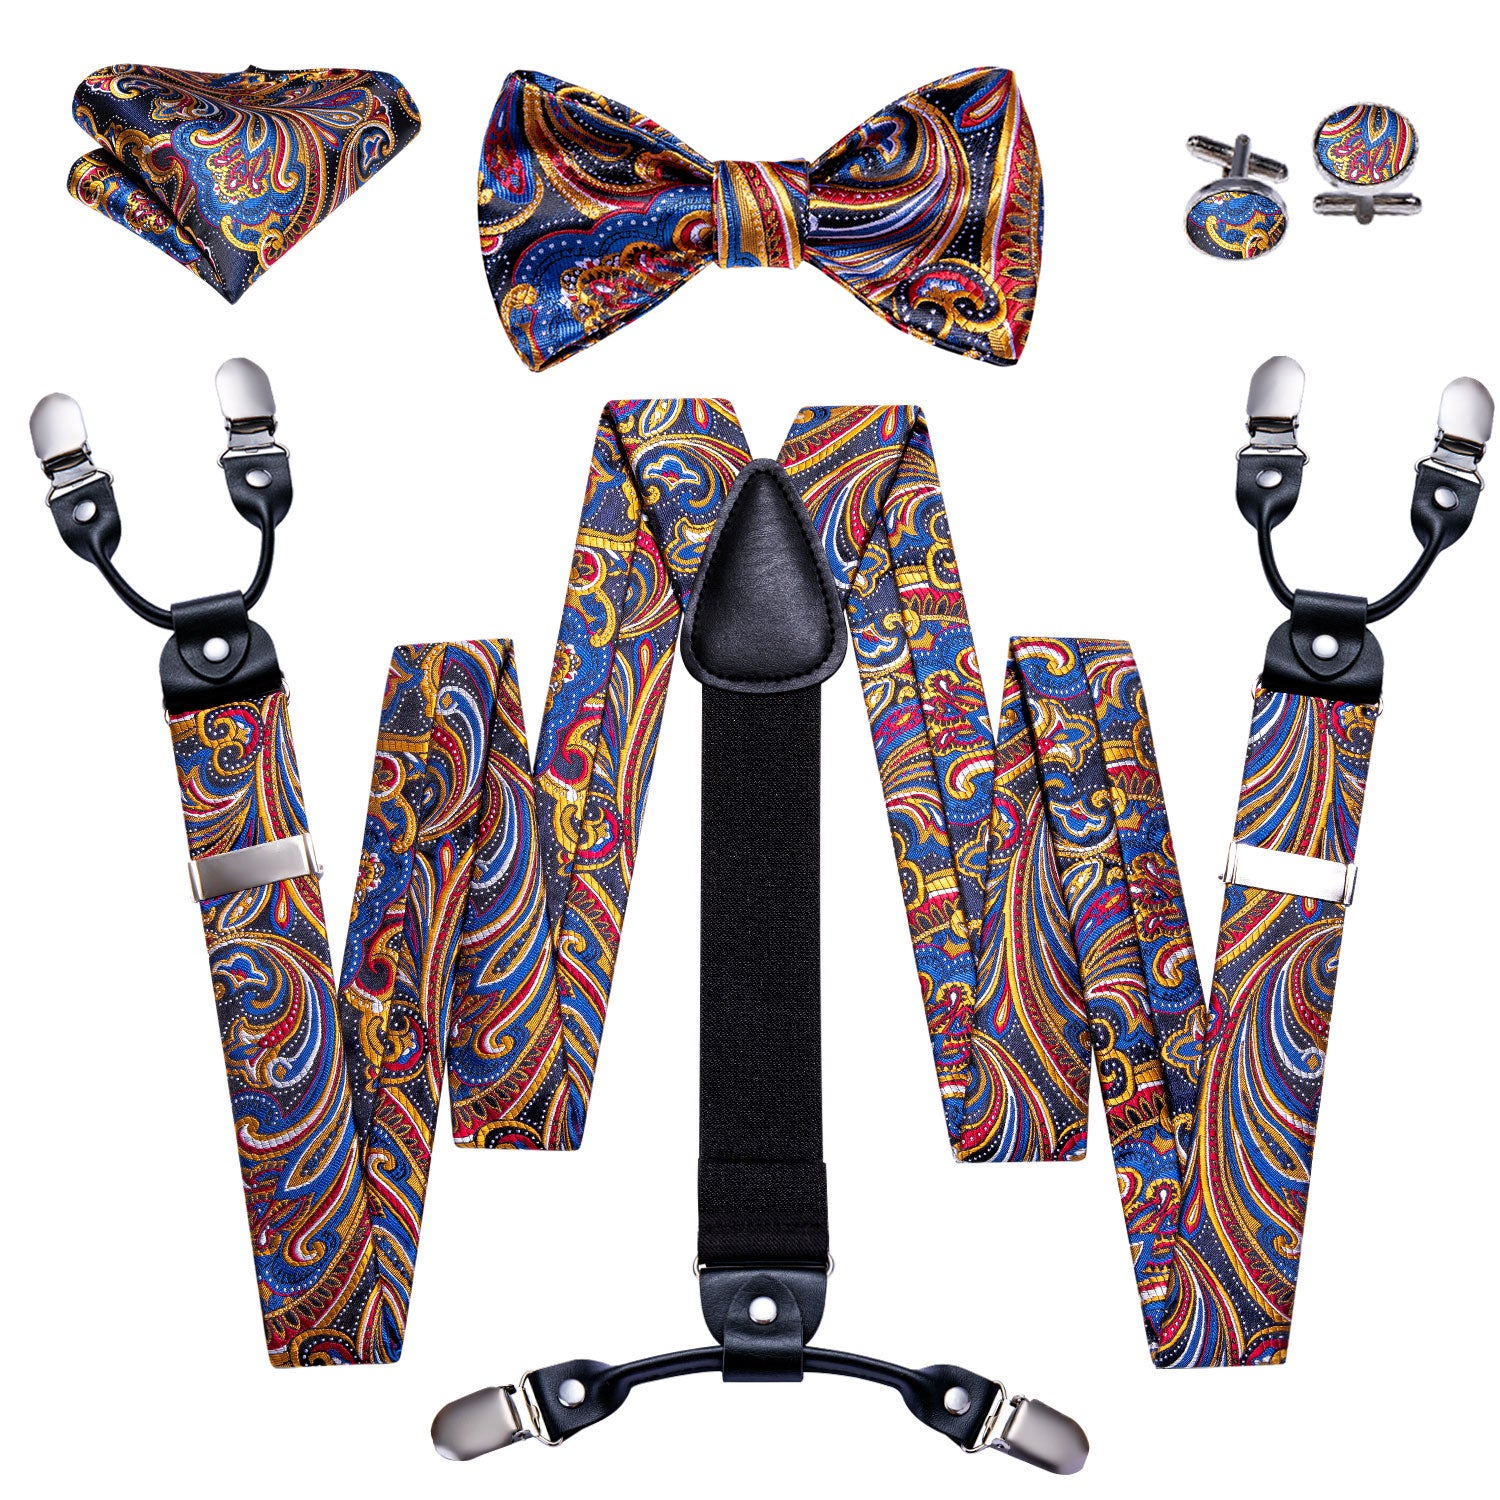 Barry.wang Gold Tie Blue Paisley Y Back Adjustable Suspenders Bow Tie Set for Men